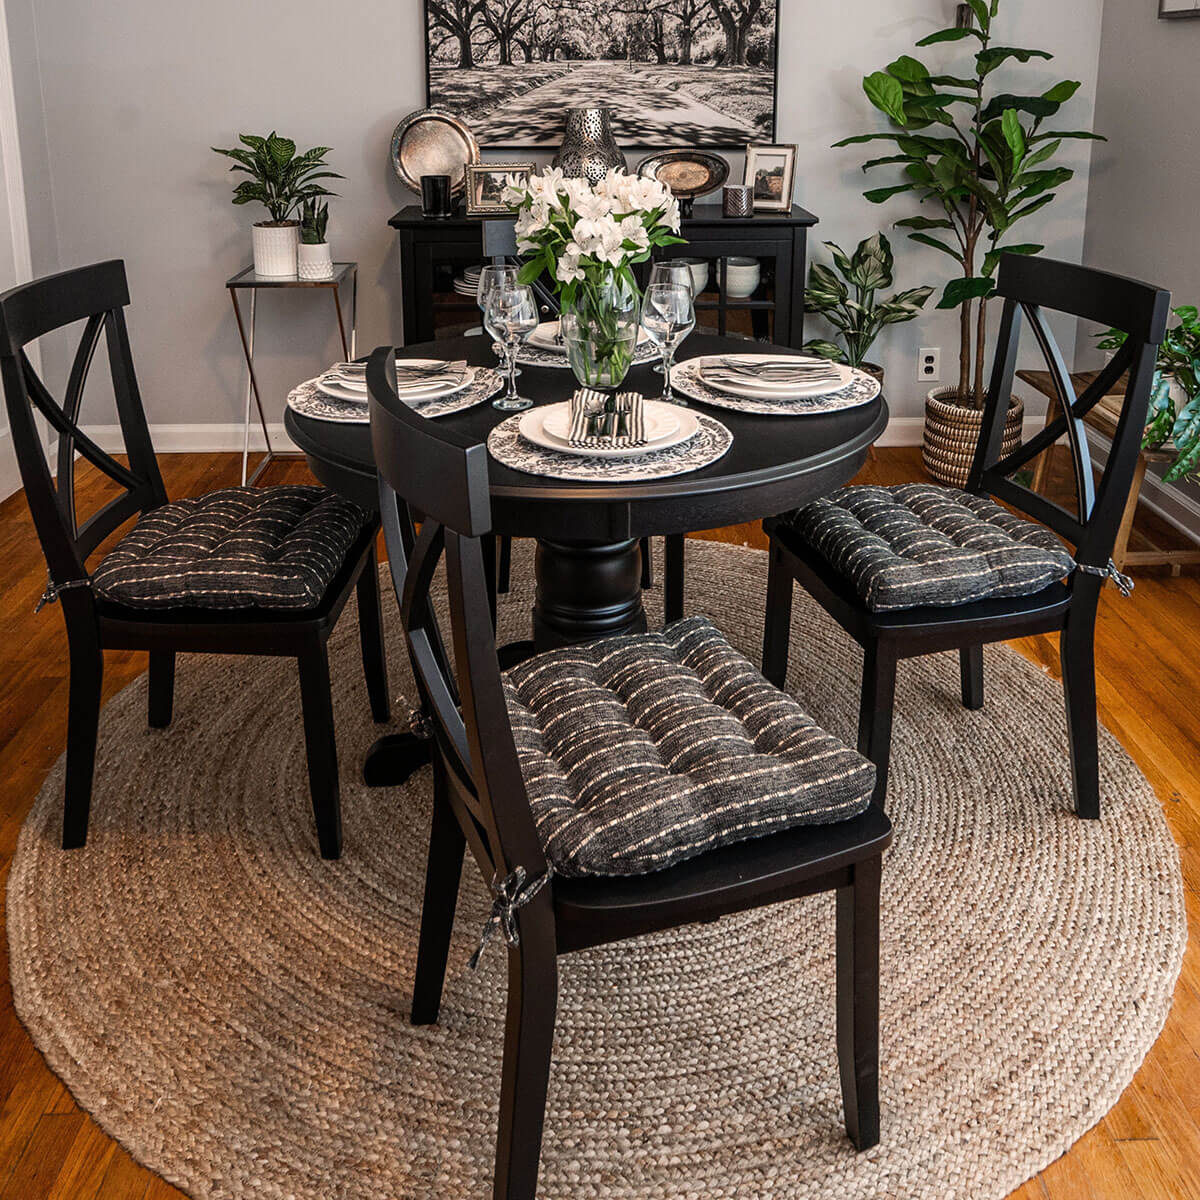 natural and black striped dining room chair cushions on black crossback dining chairs in formal dining room